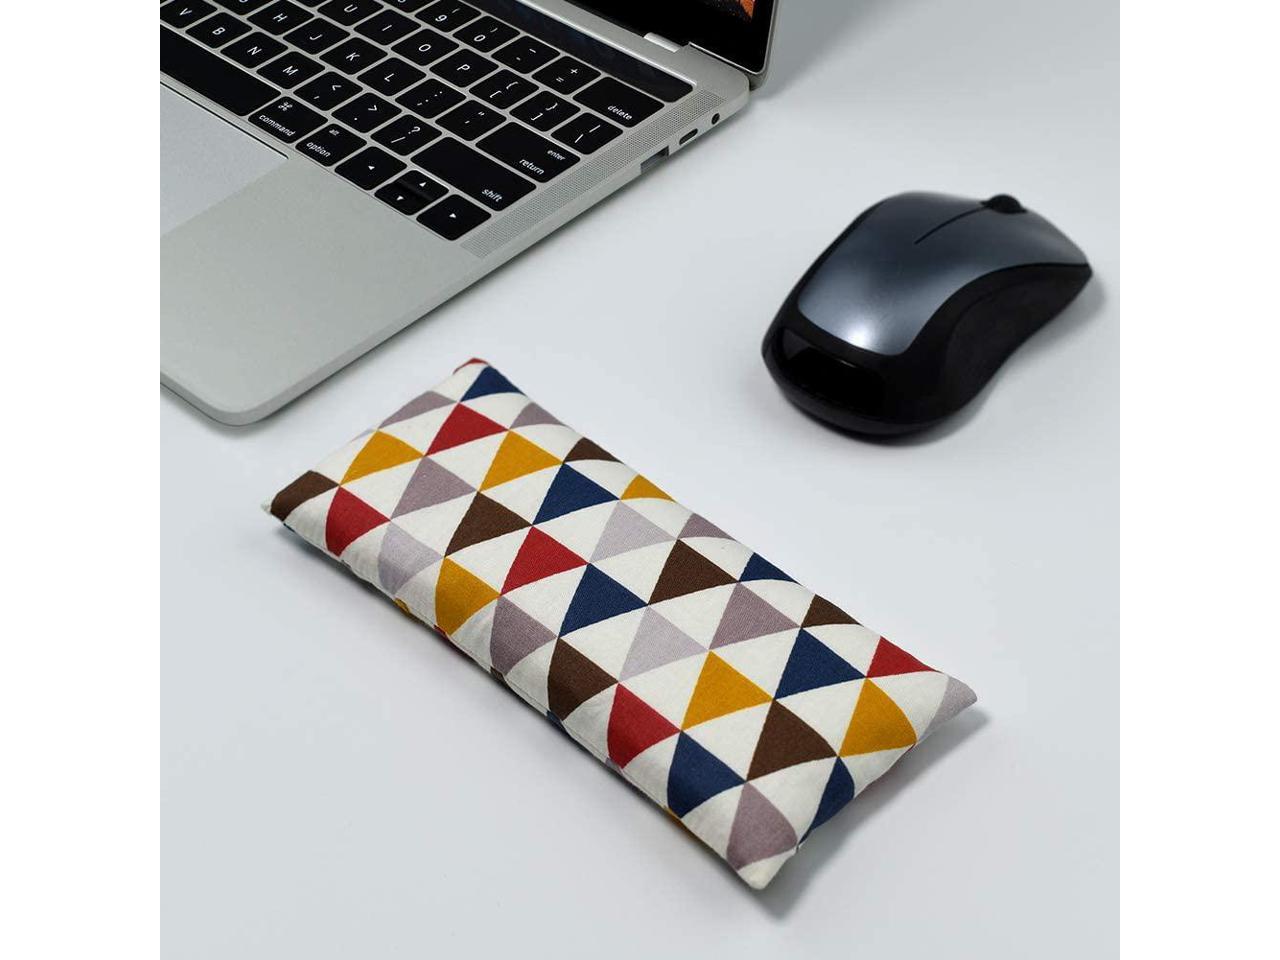 Mouse Wrist Rest Support Pad - Ergonomic Mouse Pad with Wrist Support